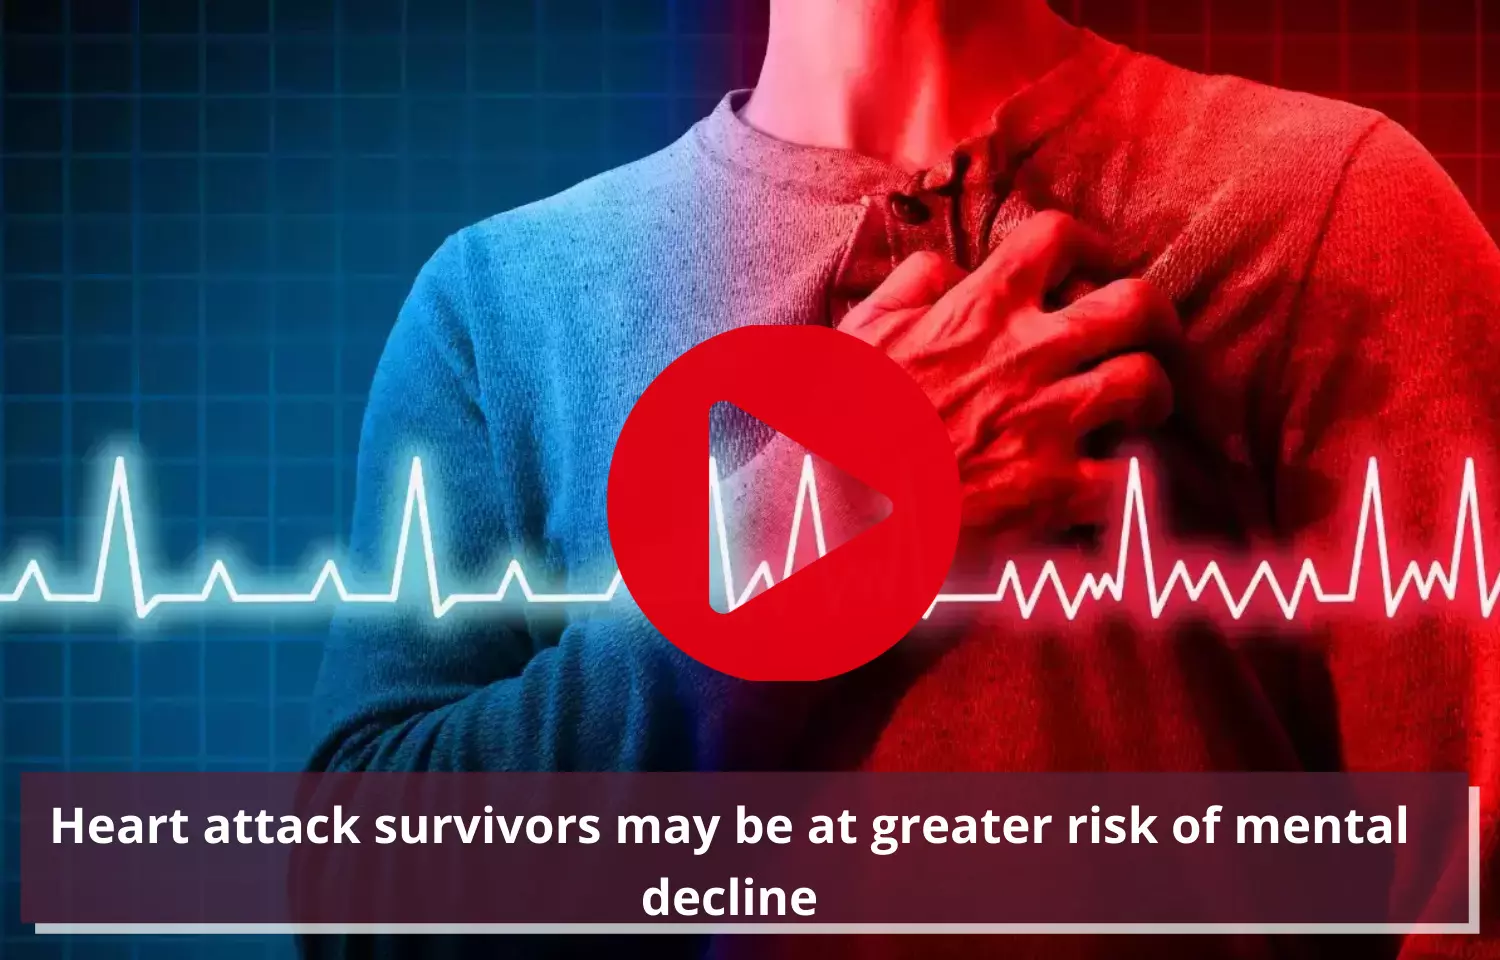 Journal Club- Heart attack survivors may be at greater risk of mental decline